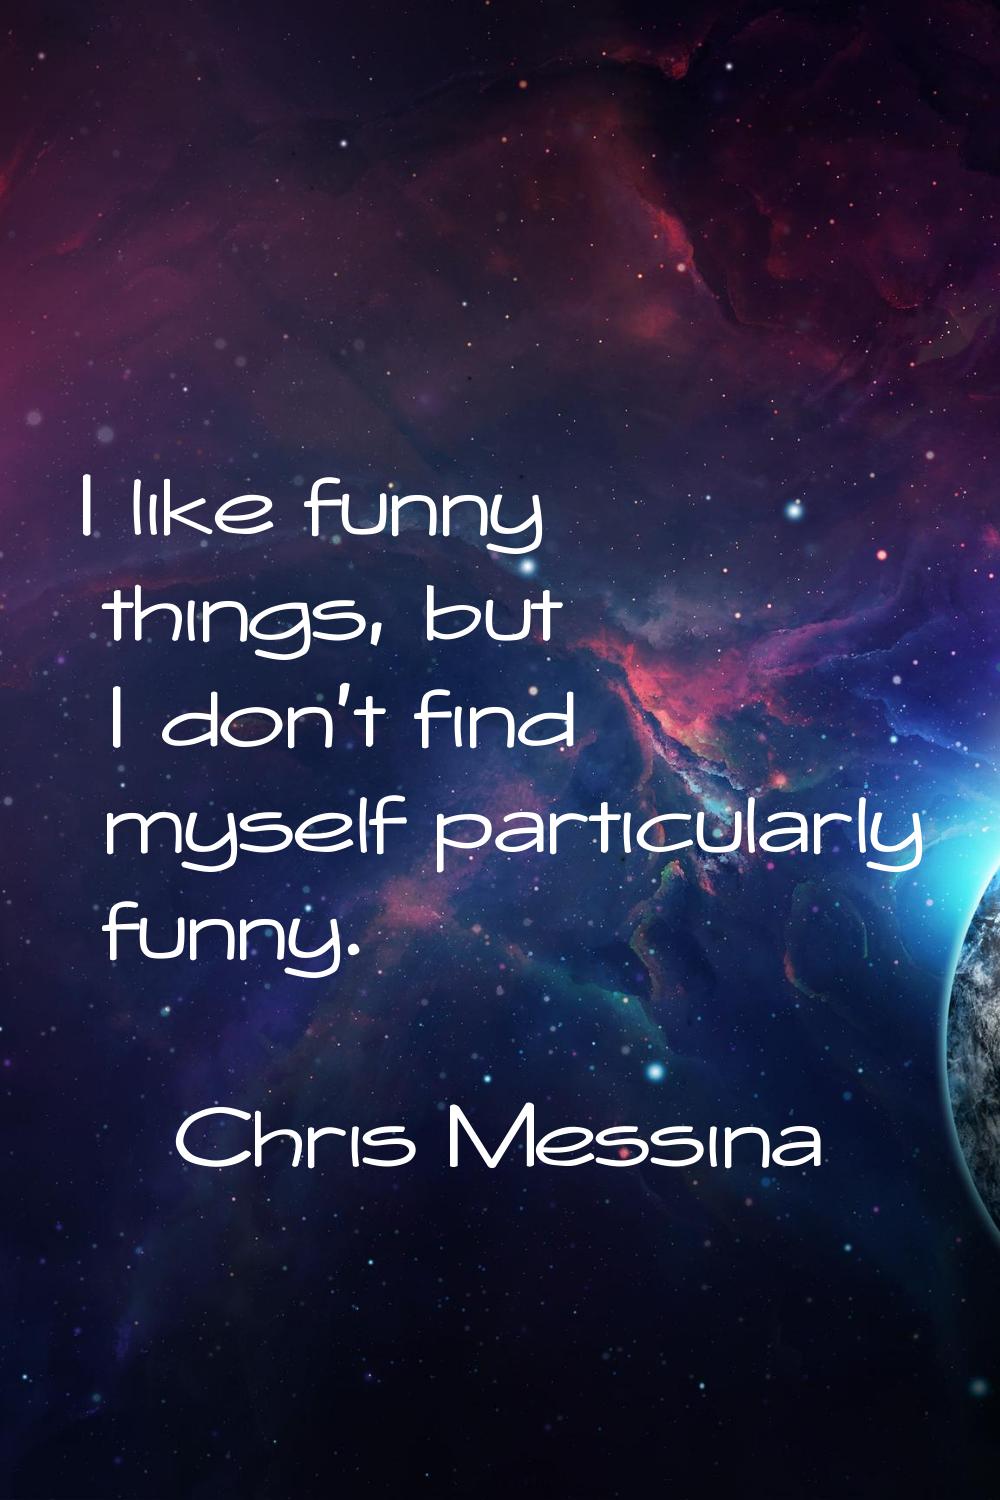 I like funny things, but I don't find myself particularly funny.